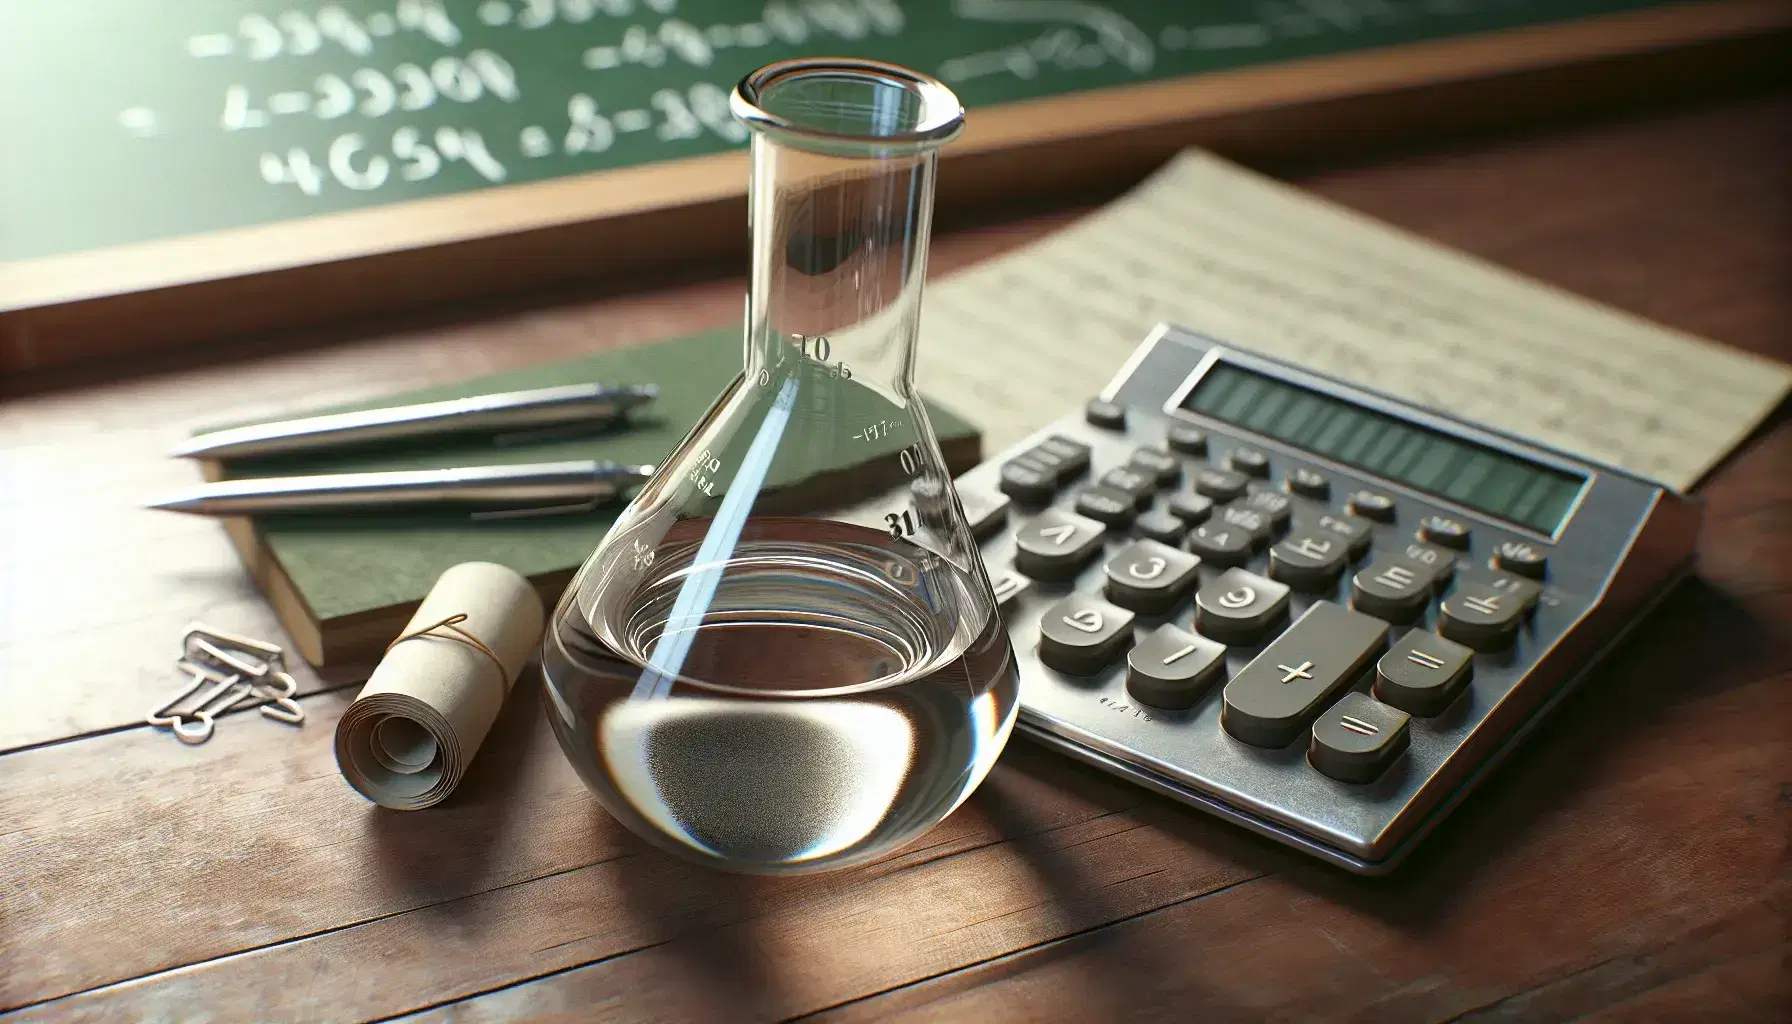 Close-up of glass flask with clear liquid on wooden surface next to steel mechanical calculator and blurry green chalkboard.